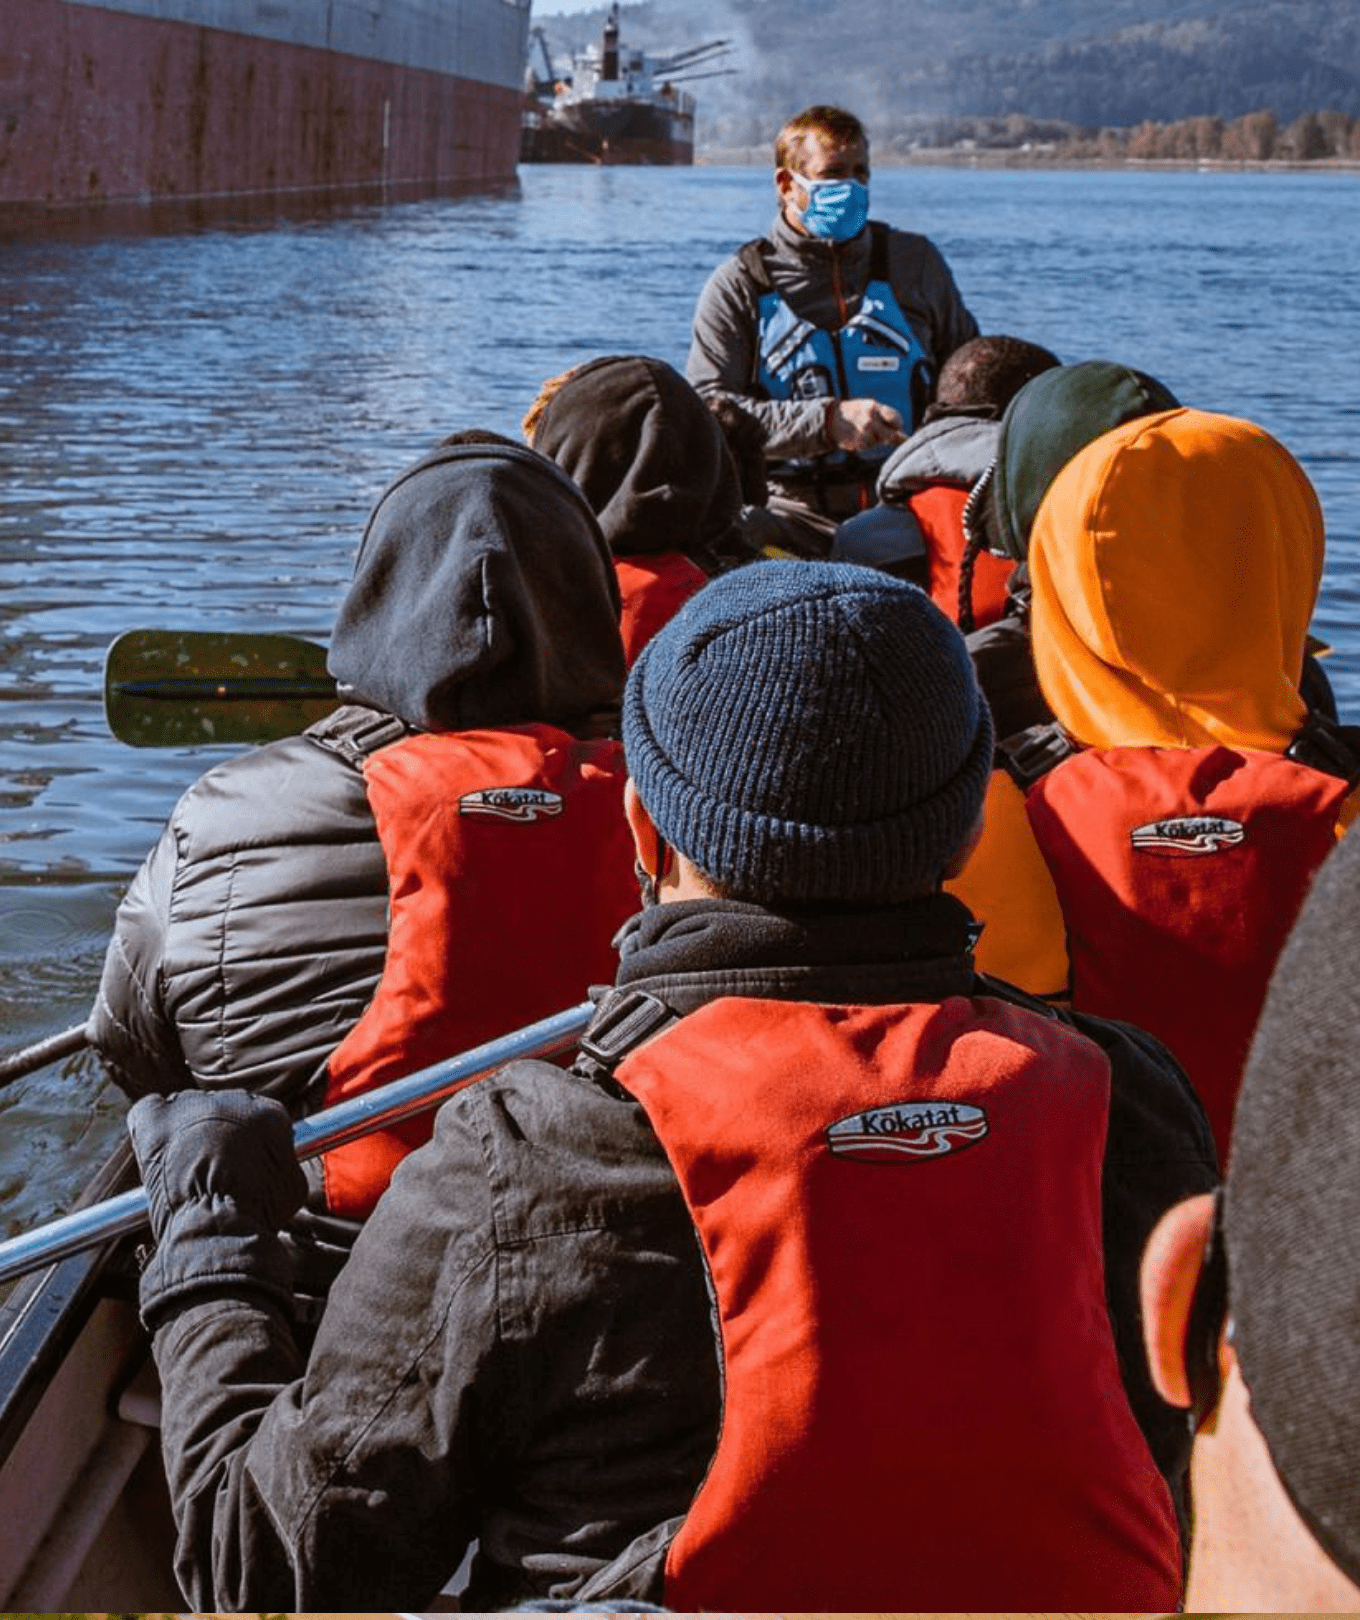 A photo taken from inside a canoe of eight people who are sitting facing away from the camera, paddling on a river. All people are wearing orange life jackets. A few people are wearing hoods or beanies on their heads.